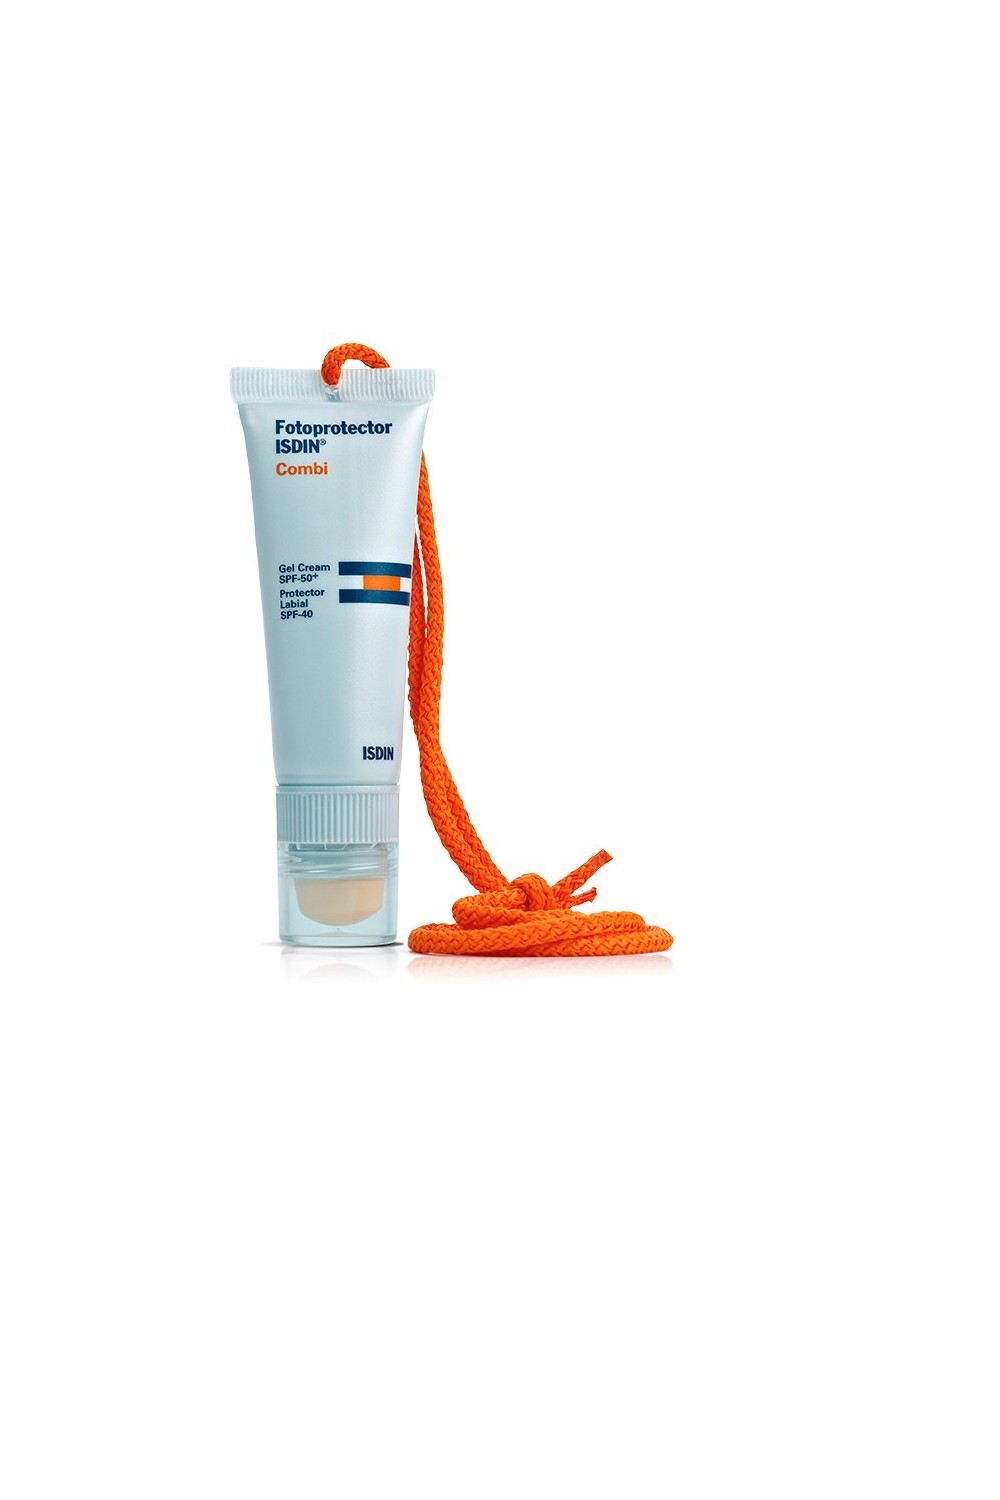 Isdin Fotoprotector Extrem Combi Spf40 20ml